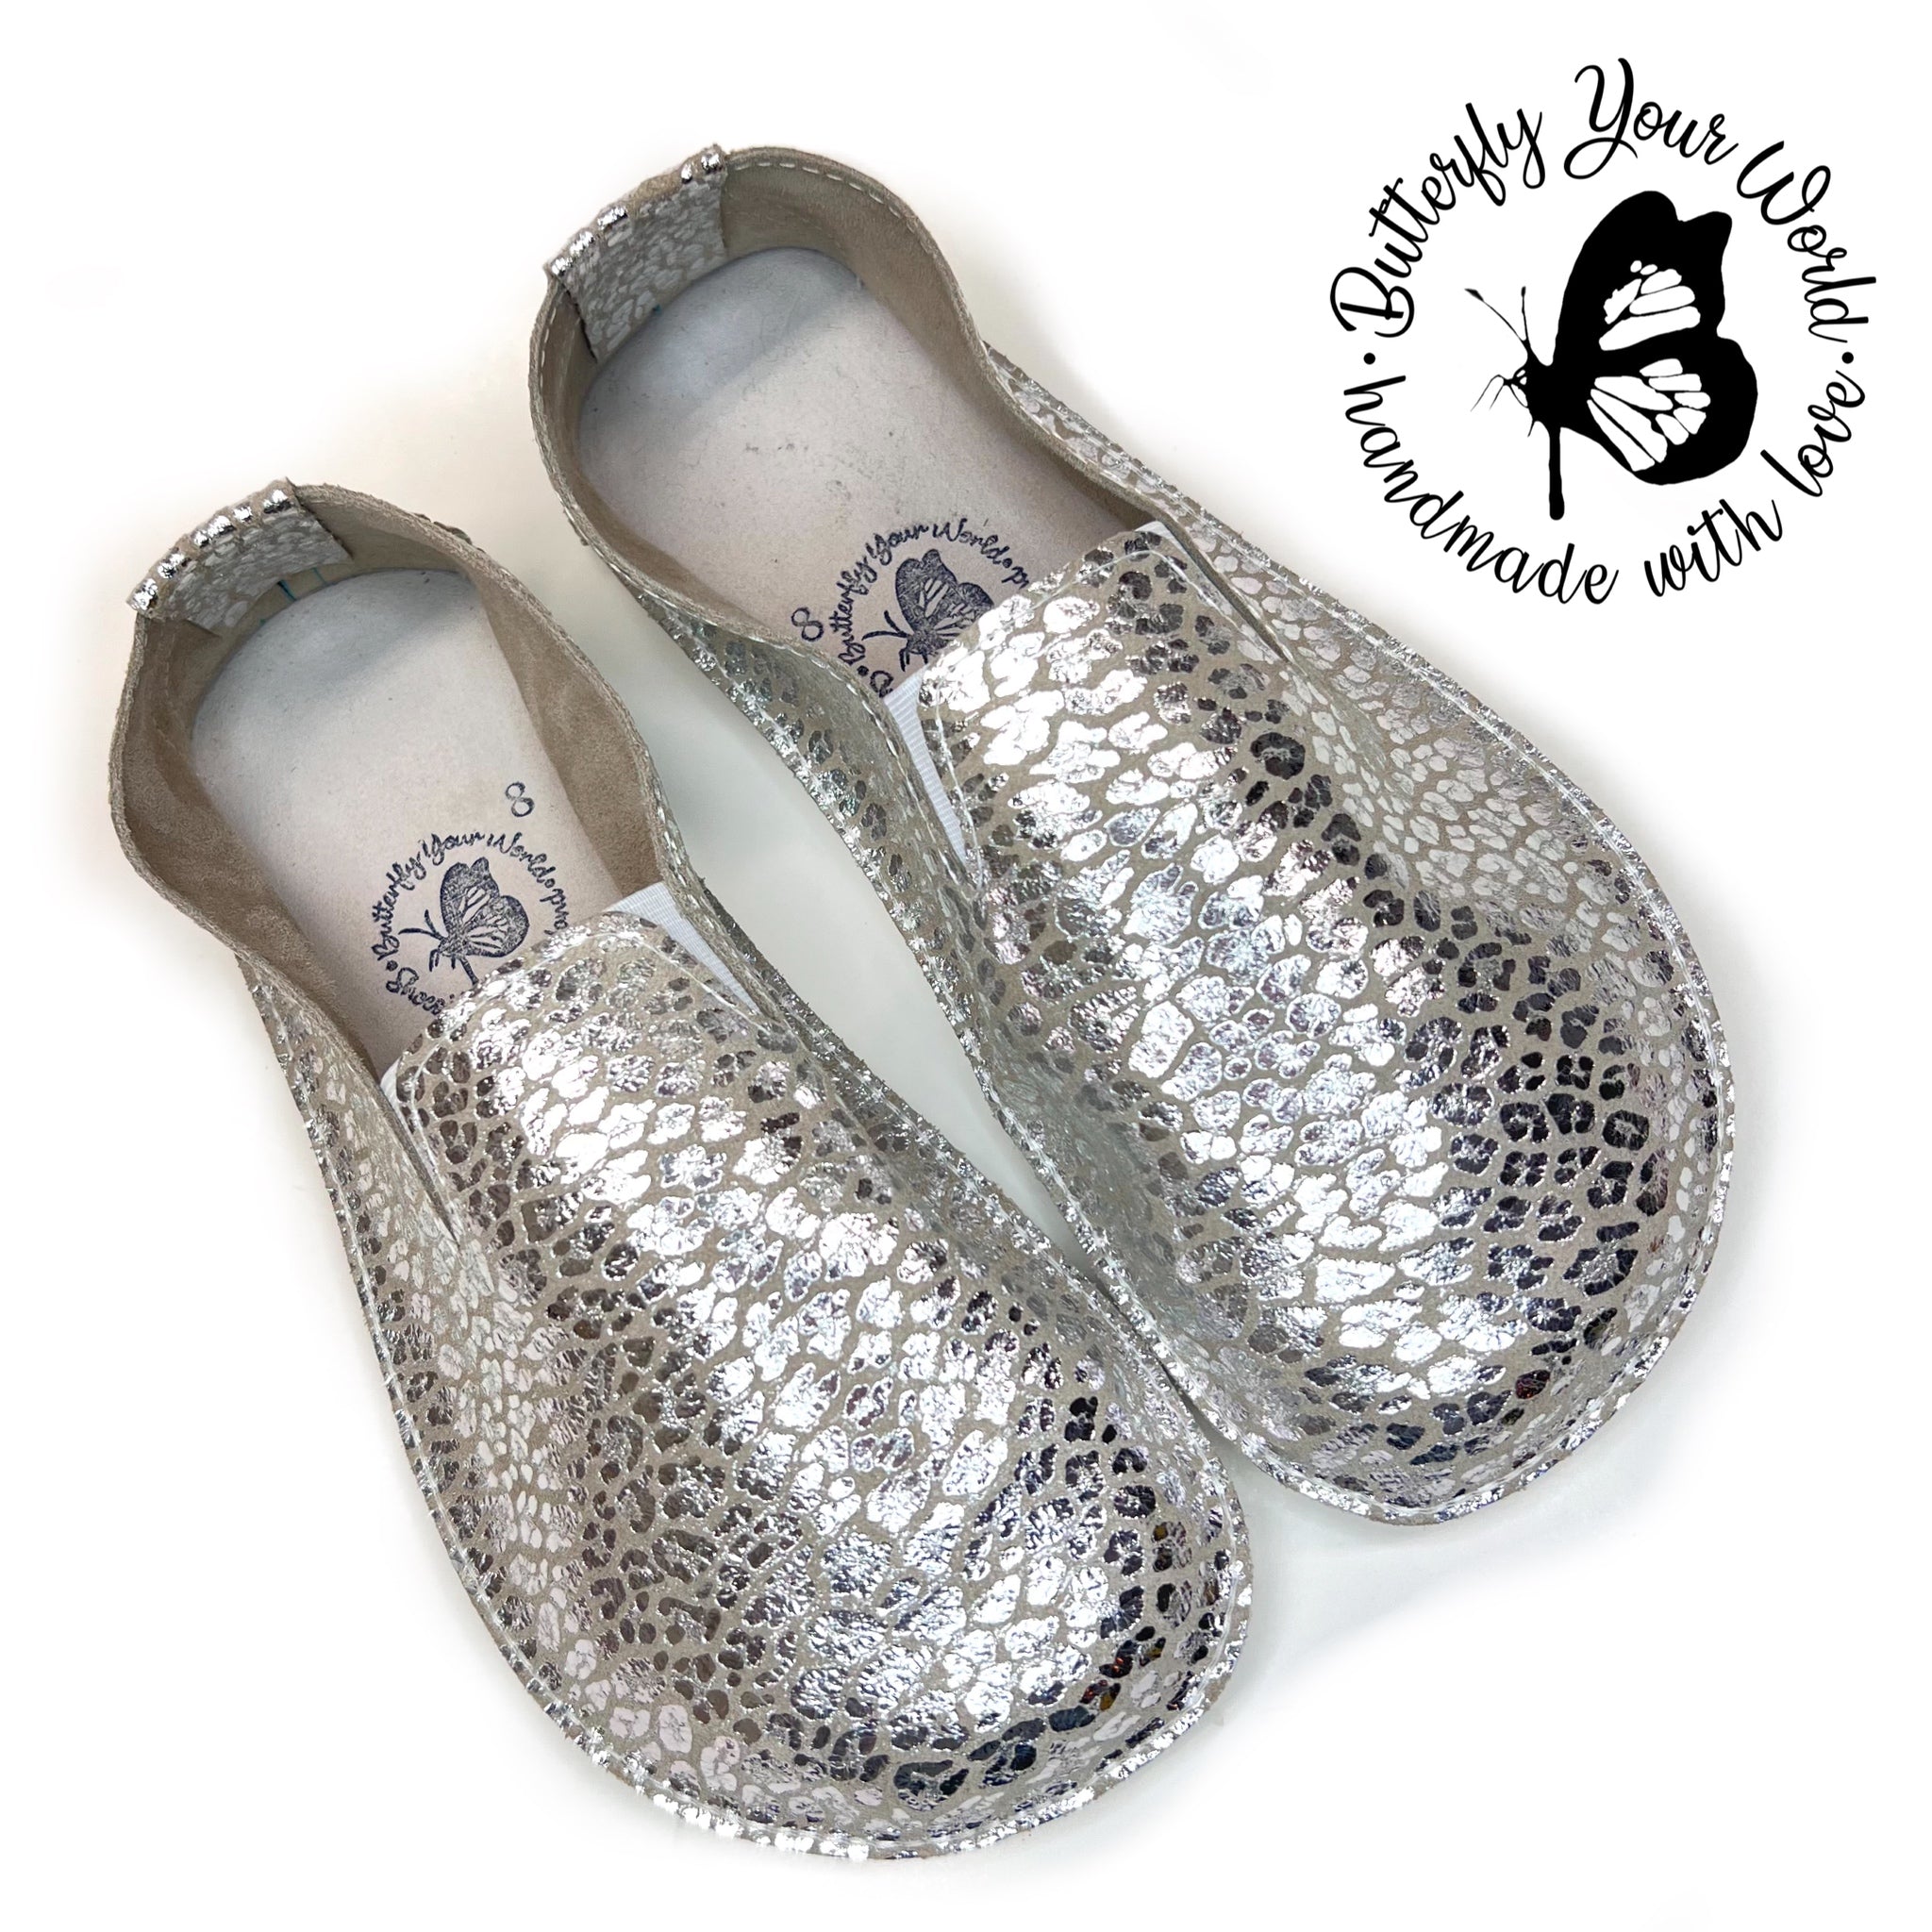 Women’s shimmery silver leather loafers